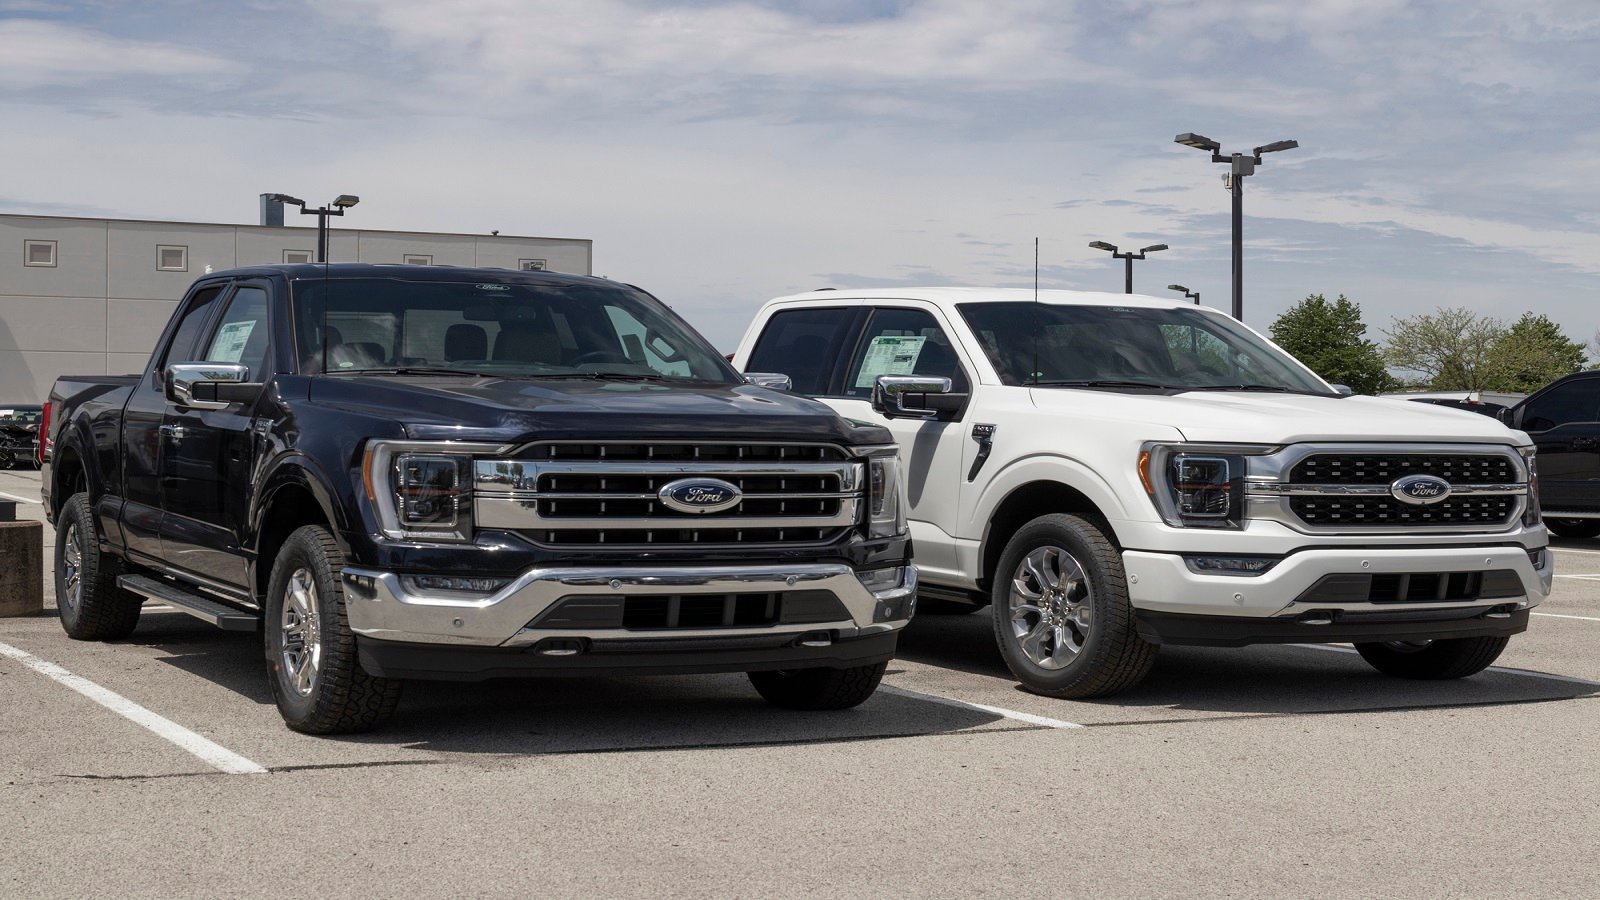 <p>As a proud owner of the 2024 Ford F-Series Super Duty, you get to experience best-in-class performance along with advanced technology and refined design. The following are the key reasons that make Ford F exceptional truck stand tall in the large pickup category:</p><ol> <li><strong>Outstanding Capability</strong>: With its high-strength steel frame, the 2024 Ford Super Duty is ready for work time, overtime, and playtime. This <a href="https://media.ford.com/content/fordmedia/fna/us/en/news/2024/01/04/ford-f-series-super-duty-prevails-as-north-america-truck-of-the-.html" rel="noopener">truck is named North America’s Truck of the Year</a> for its unbeatable combination of strength and towing capacity.</li> <li><strong>Variety of Options</strong>: The 2024 Super Duty lineup offers <strong>18 models</strong> to choose from, including gas and diesel engines with conventional or gooseneck towing capabilities. You can also customize your truck by selecting the desired exterior color, appearance packages, and interior seating options.</li> <li><strong>Technology and Safety Features</strong>: Equipped with FordPass® Connect with 5G Wi-Fi, the F-250 XLT ensures seamless connectivity for you and your passengers. The truck also has Pre-Collision Assist® with Automatic Emergency Braking (AEB) and Forward Collision Warning, enhancing safety on the road.</li> </ol><p>The Ford F-Series Super Duty is not only a reliable workhorse but also a symbol of style, comfort, versatility, and innovation in the large pickup segment.</p>